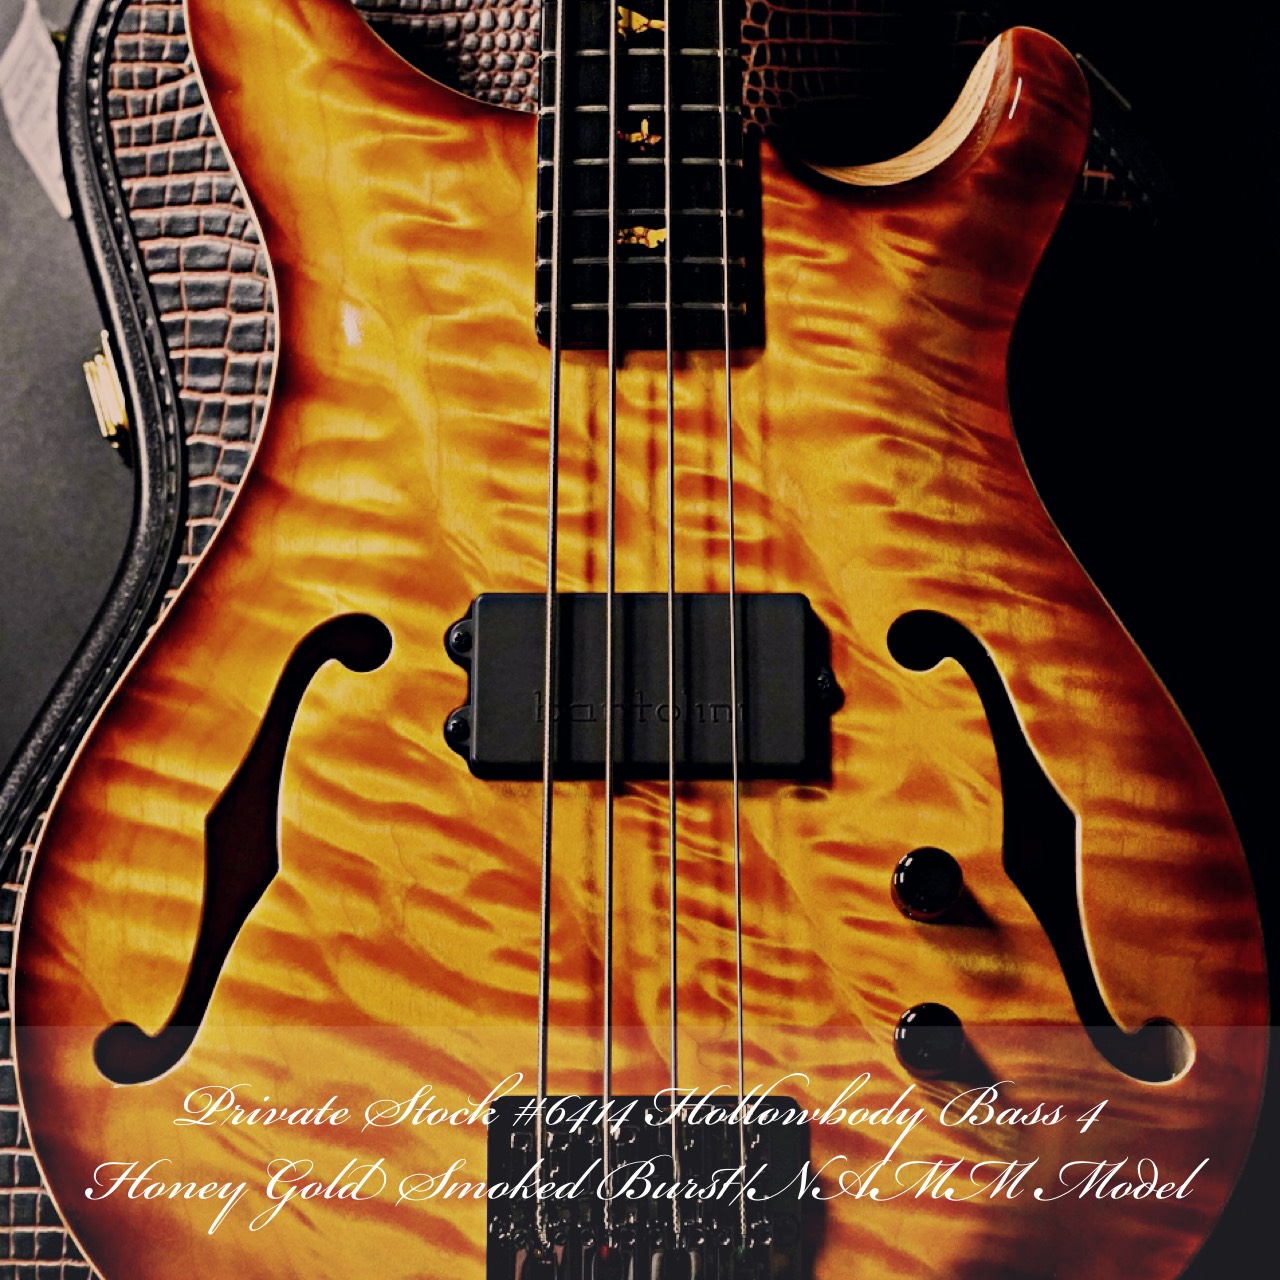 PRIVATE STOCK BASS